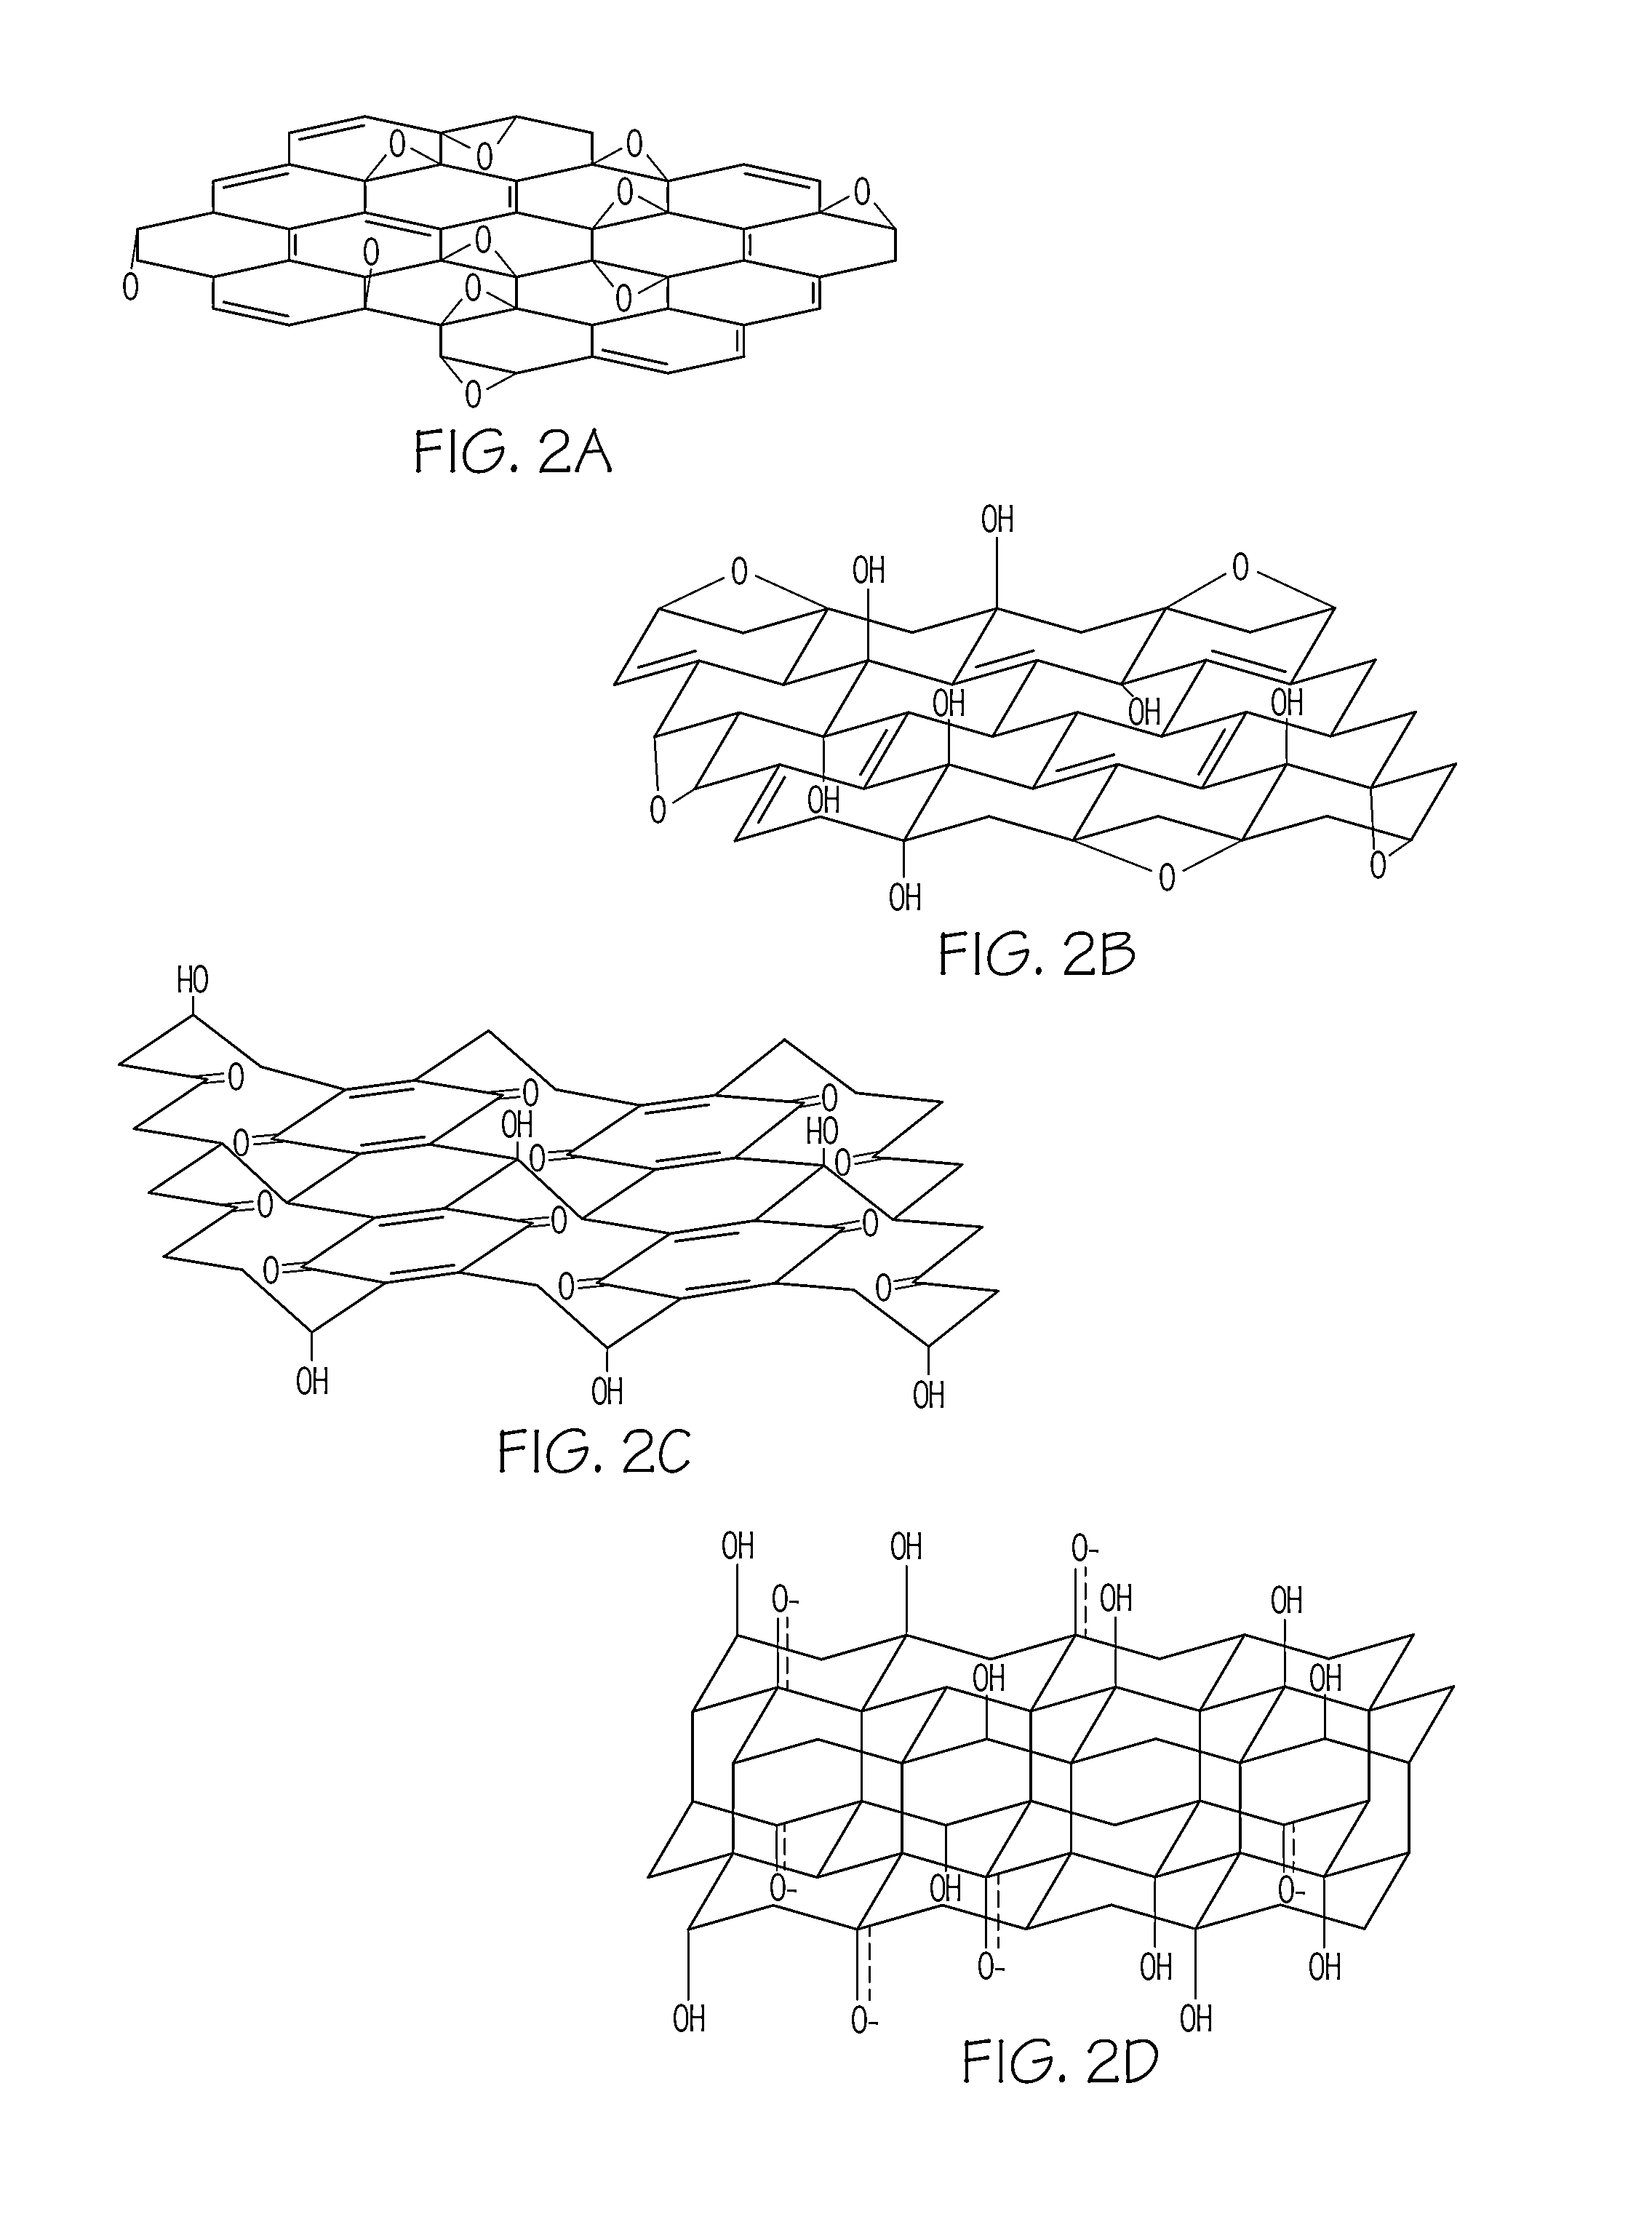 Graphene oxide filters and methods of use